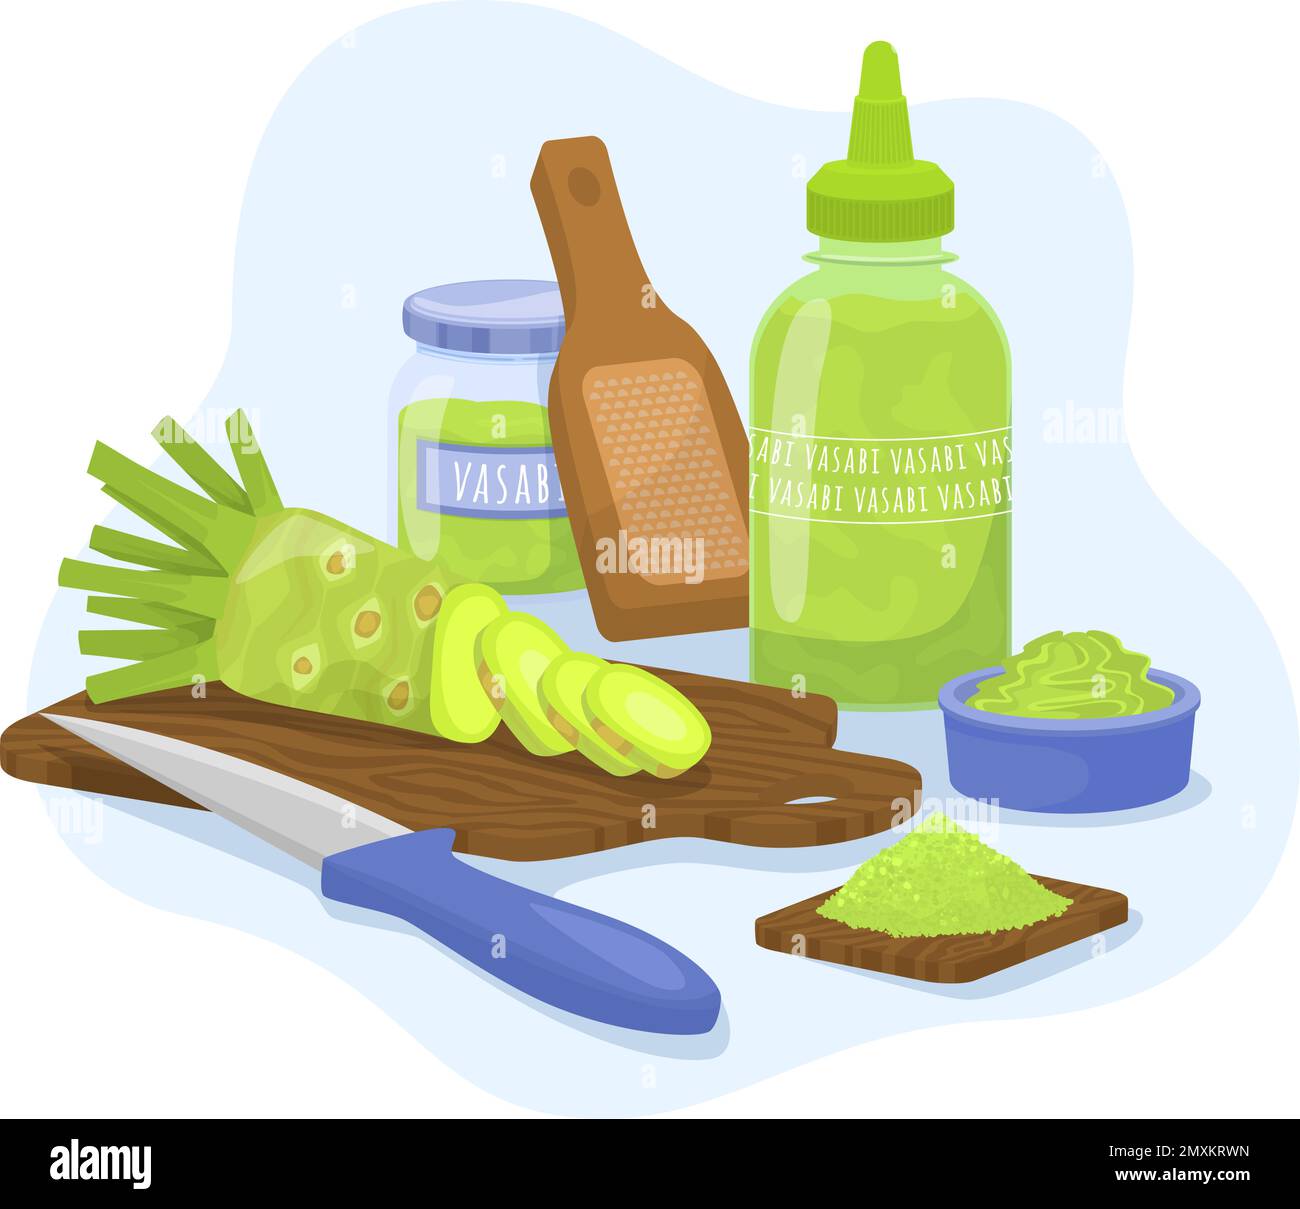 Wasabi sauce flat composition with kitchen utensils carving board knife and cut root with powder bottles vector illustration Stock Vector